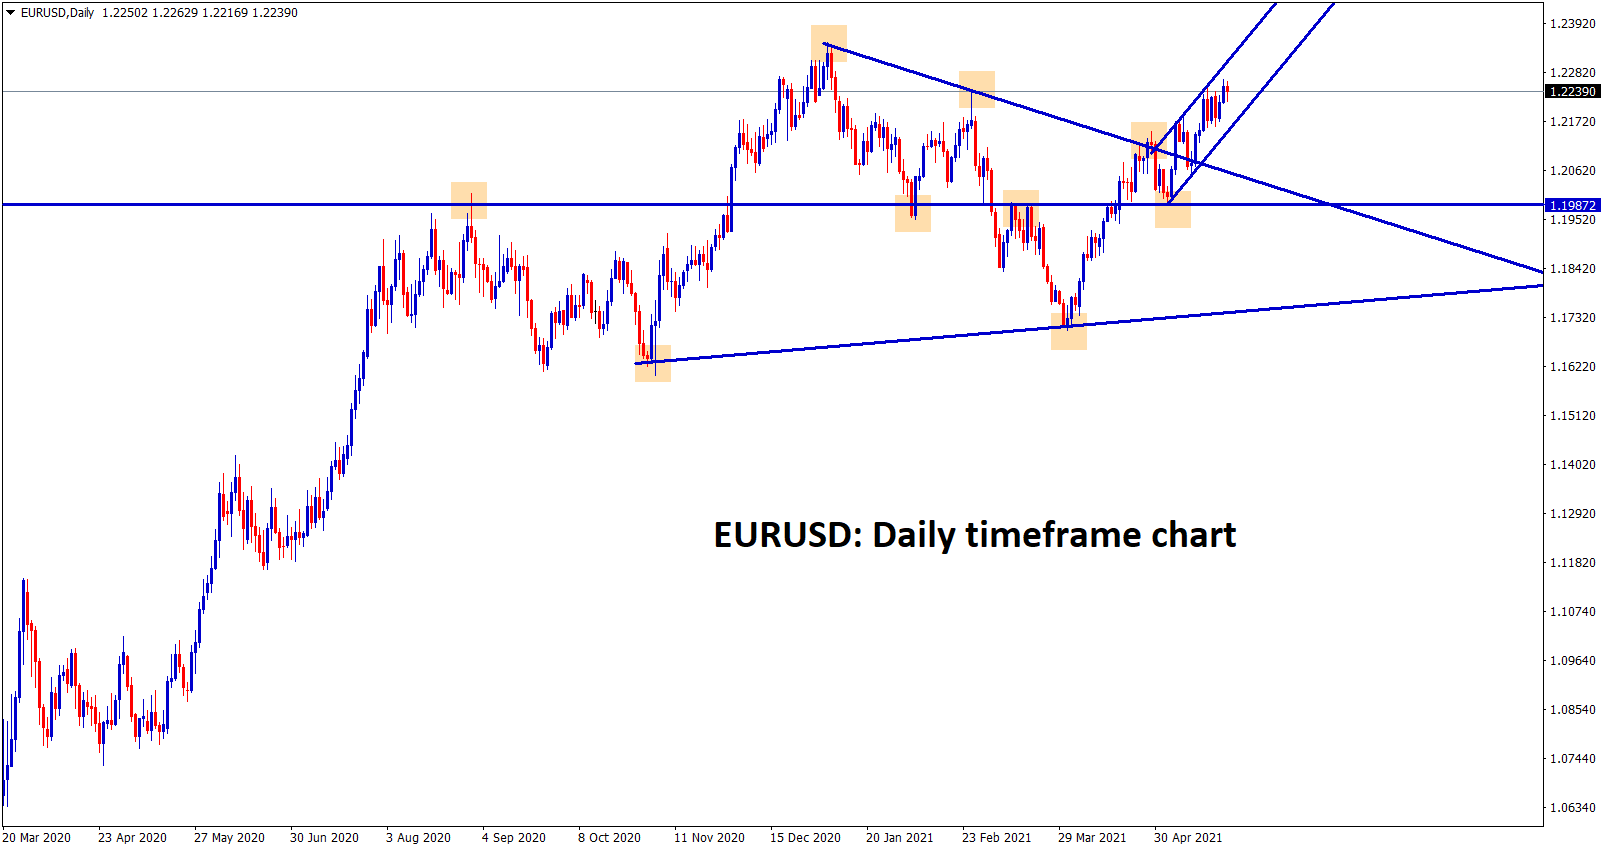 EURUSD has broken the top of the symmetrical triangle and moving now in an Ascending channel range